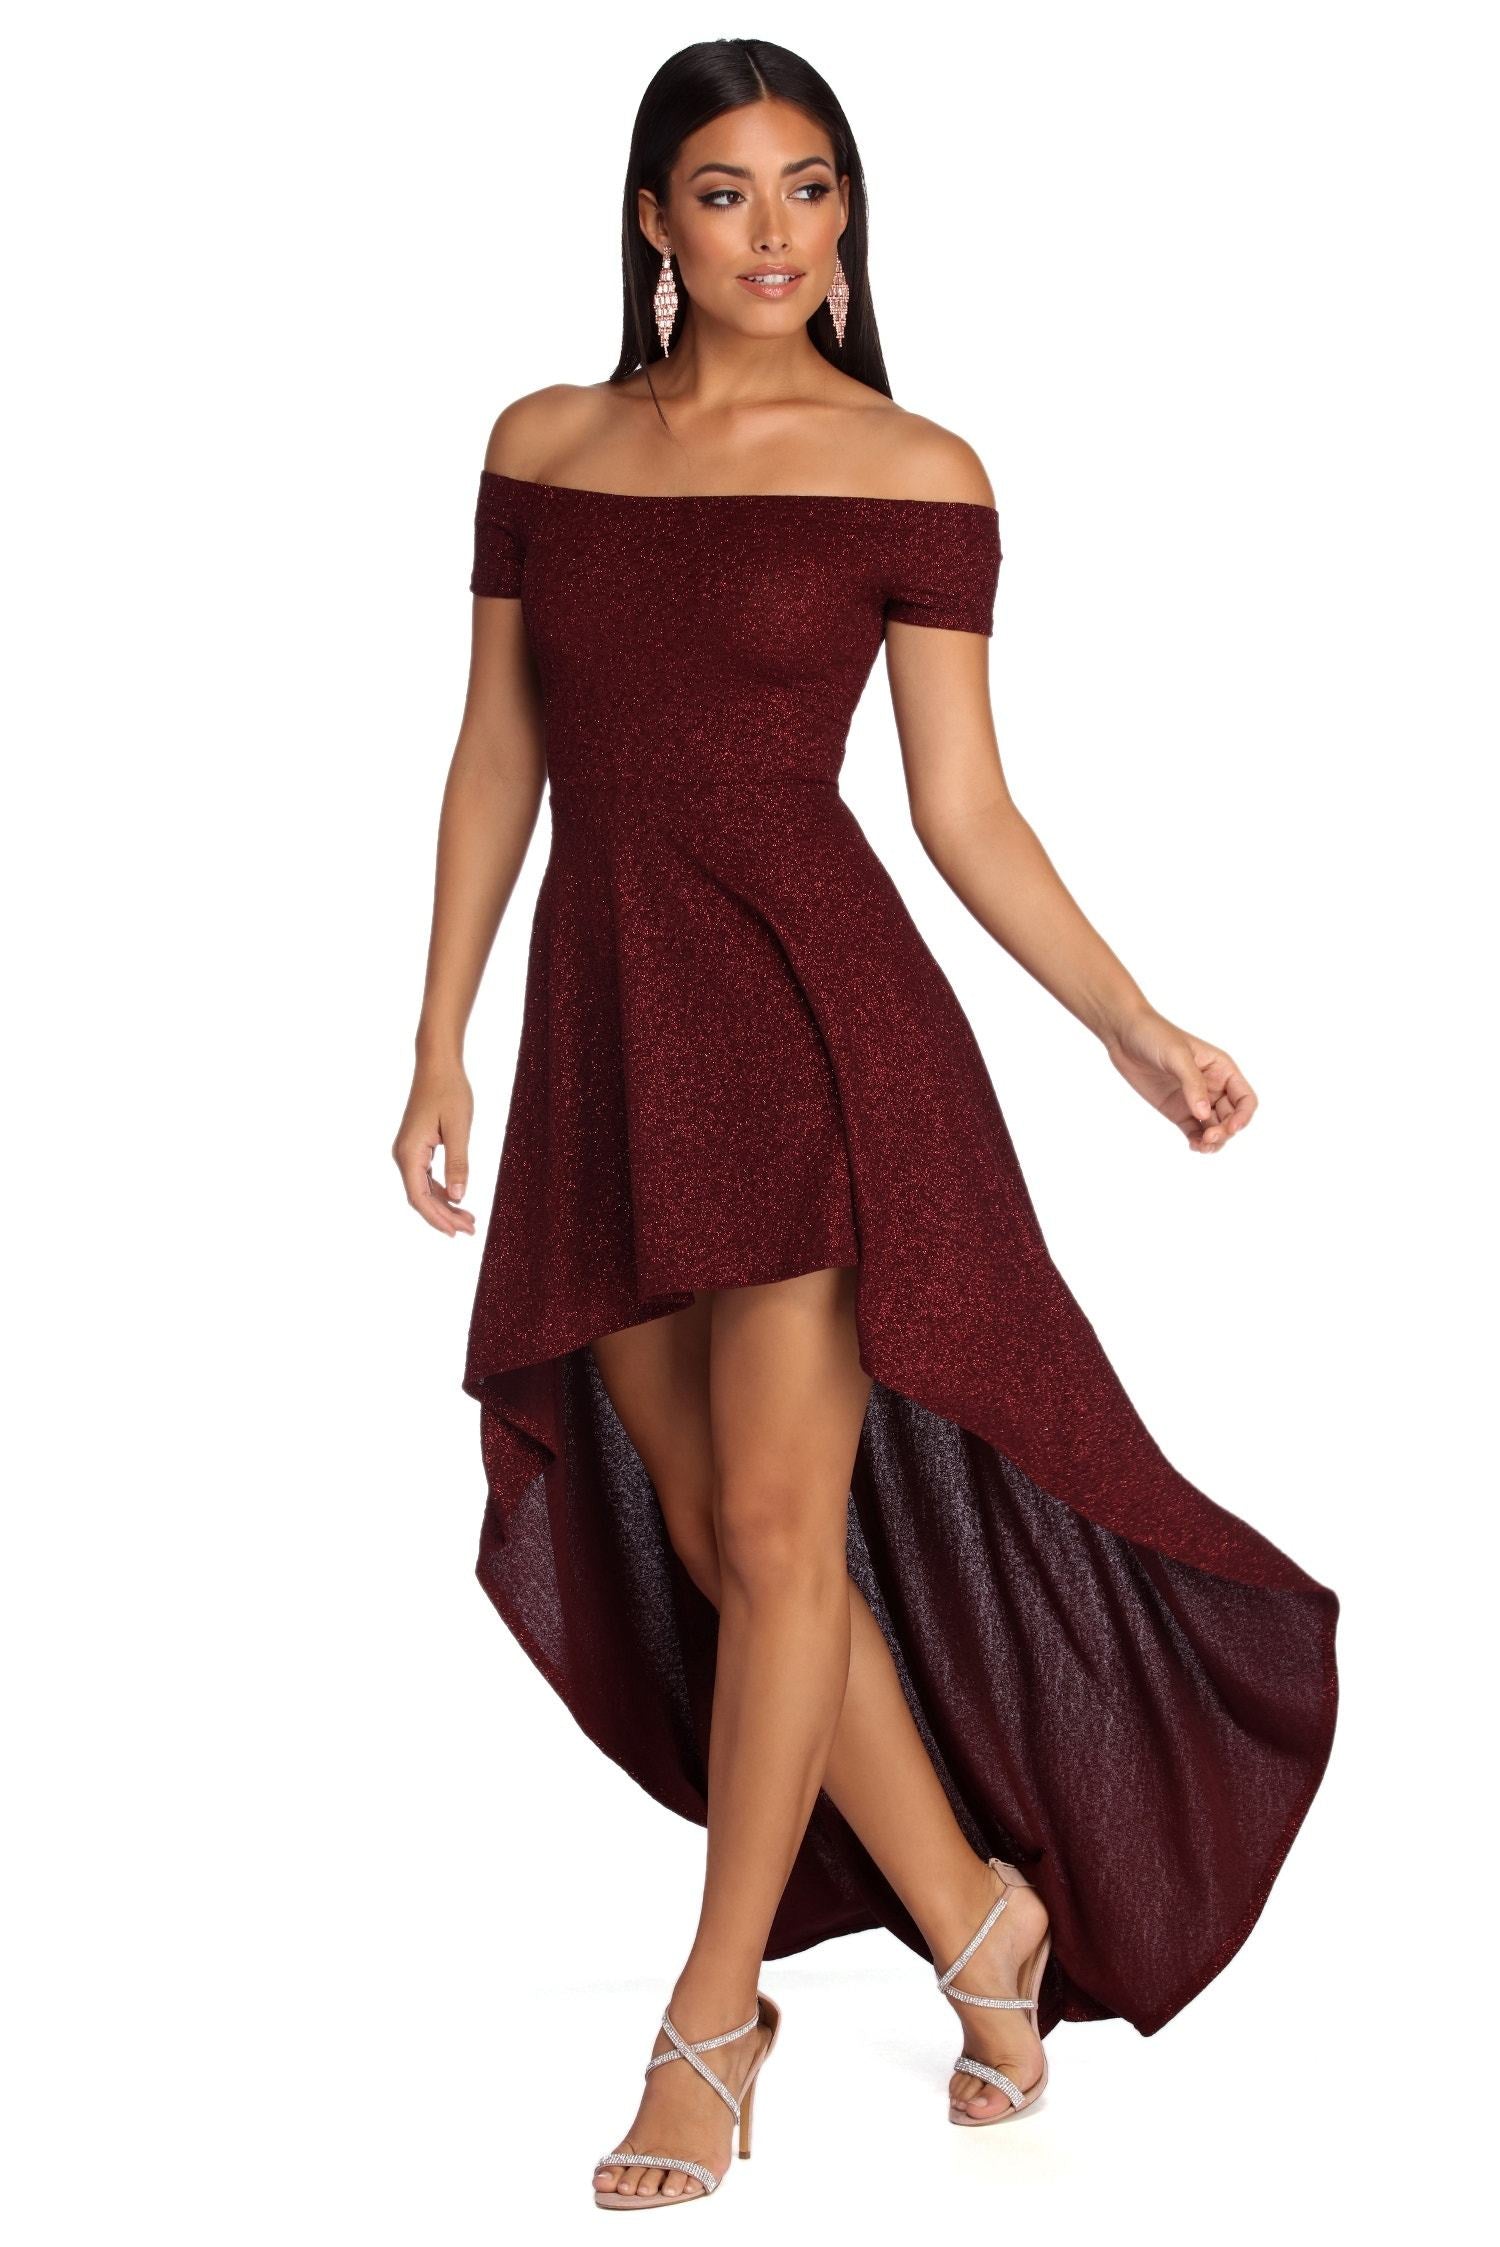 Penelope Glitter Formal High Low Dress - Lady Occasions